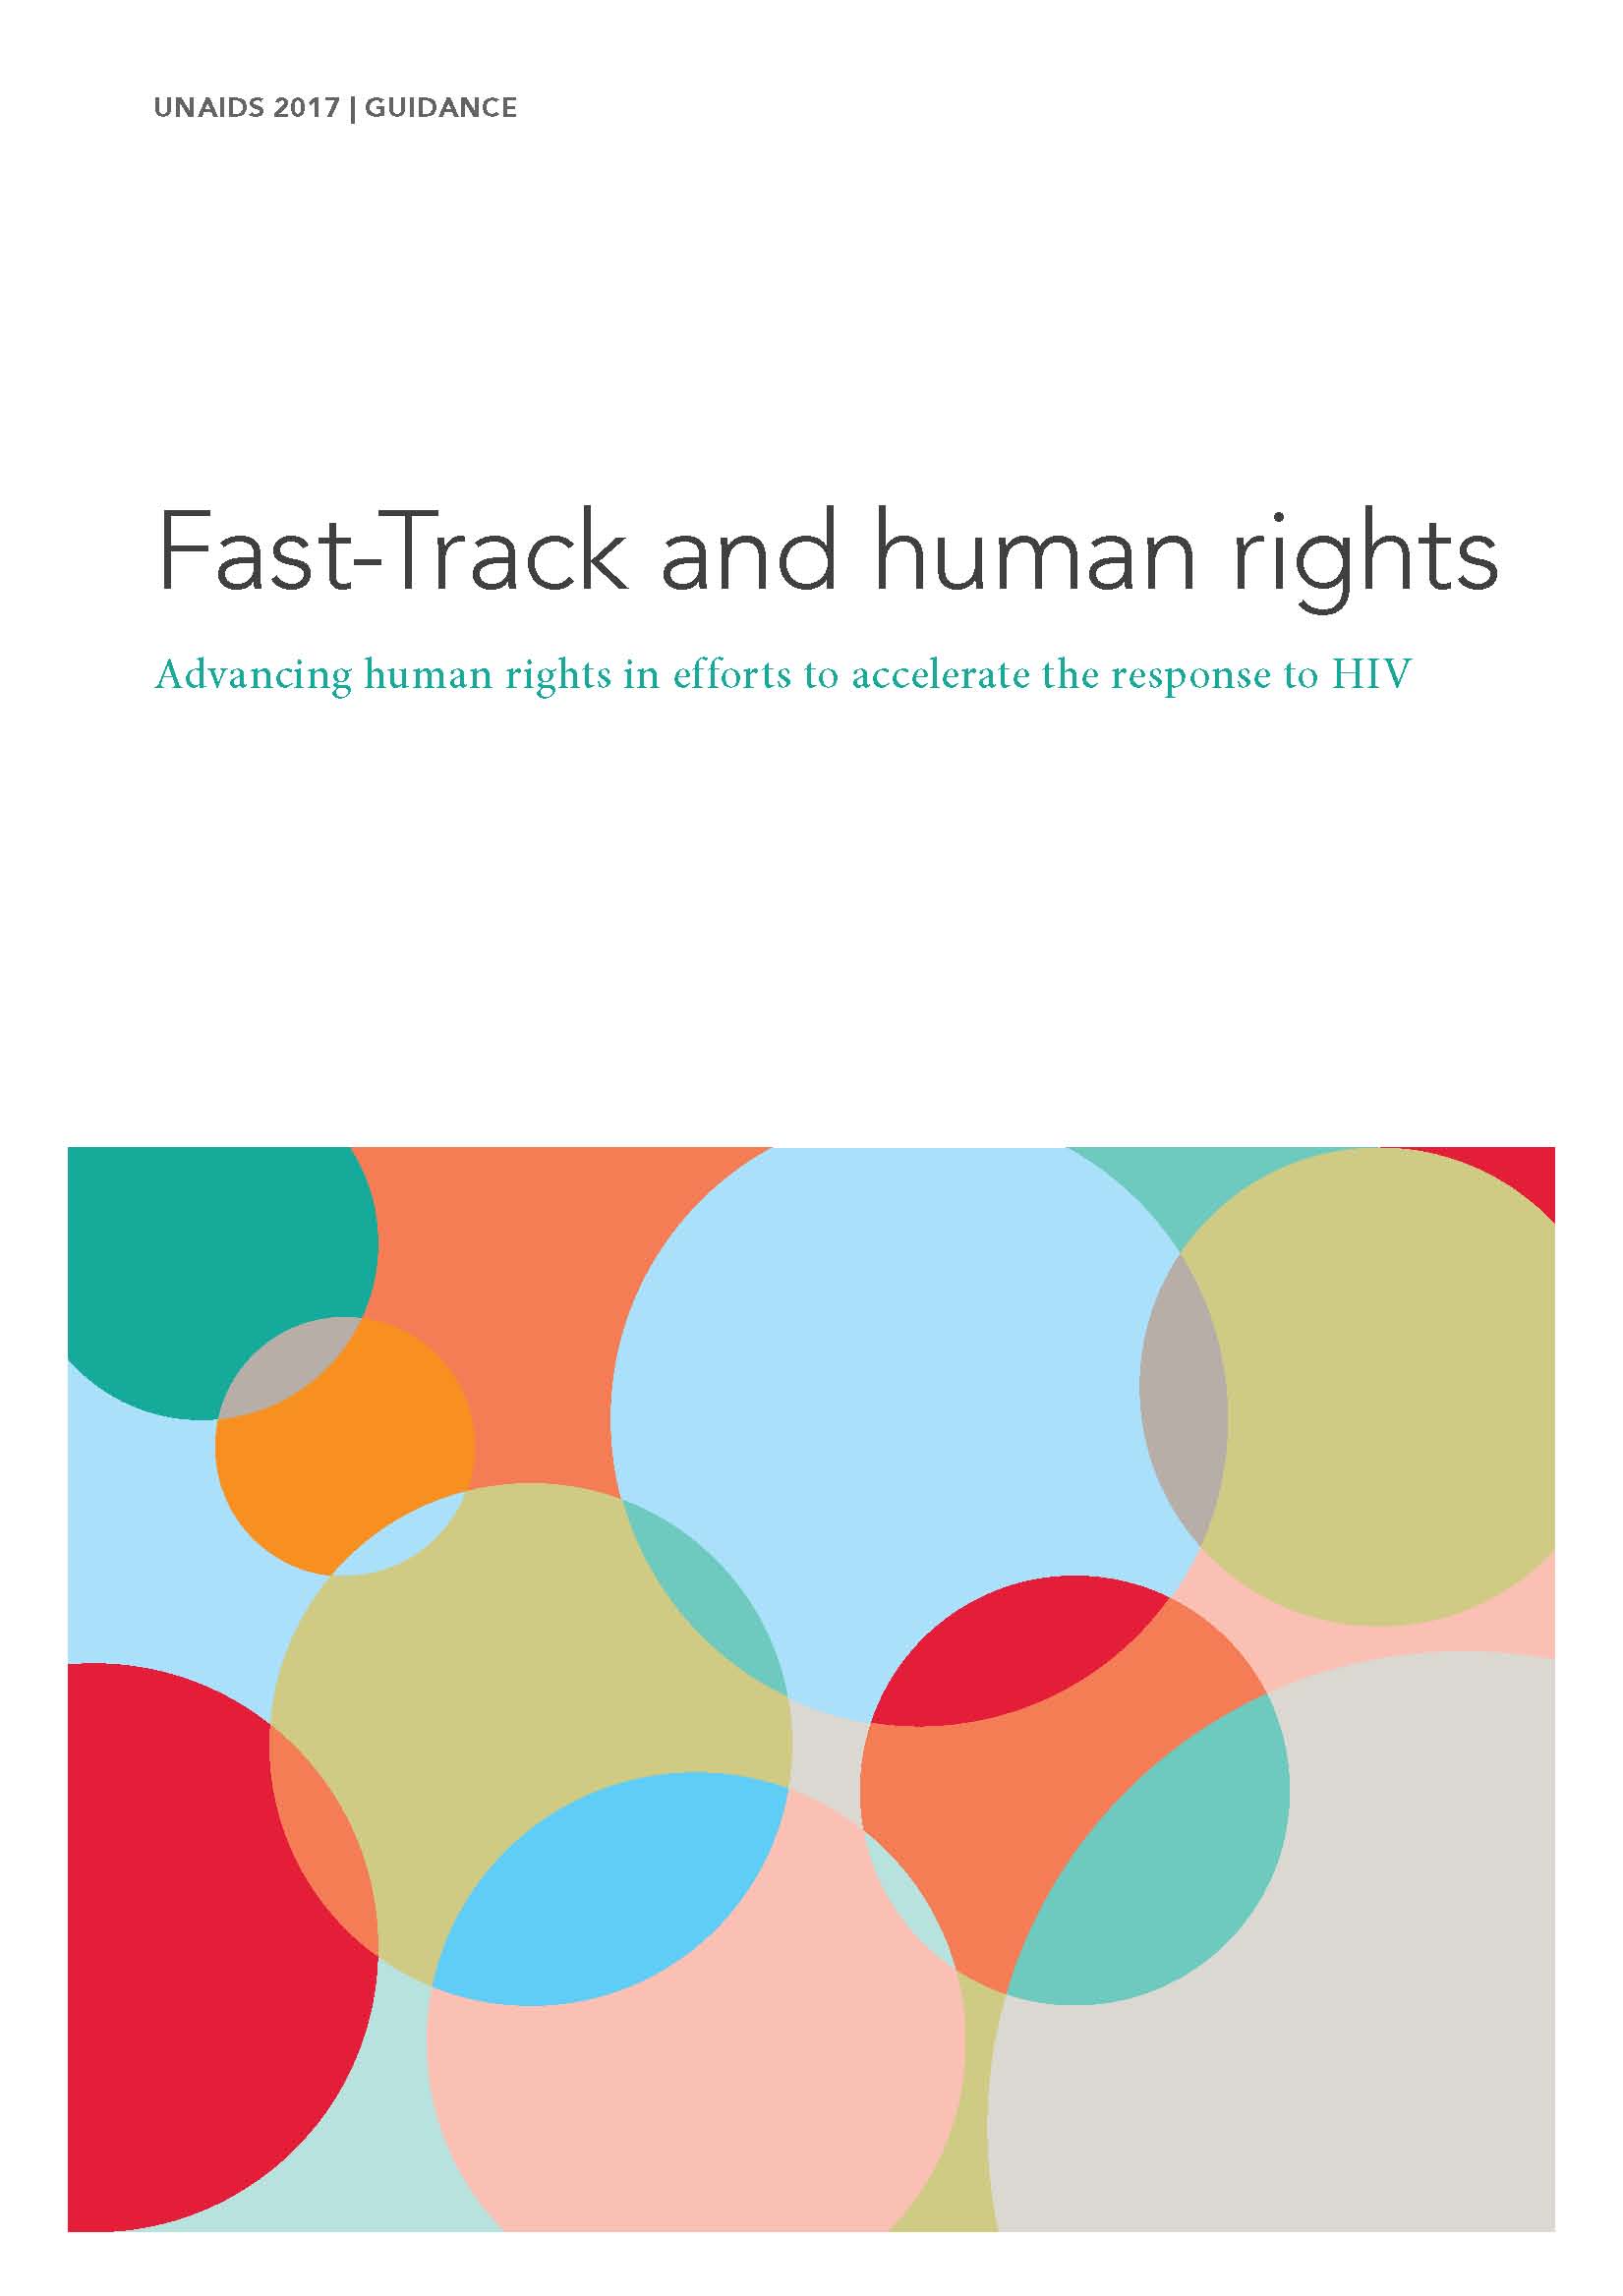 JC2895 Fast Track and human rights Print 1